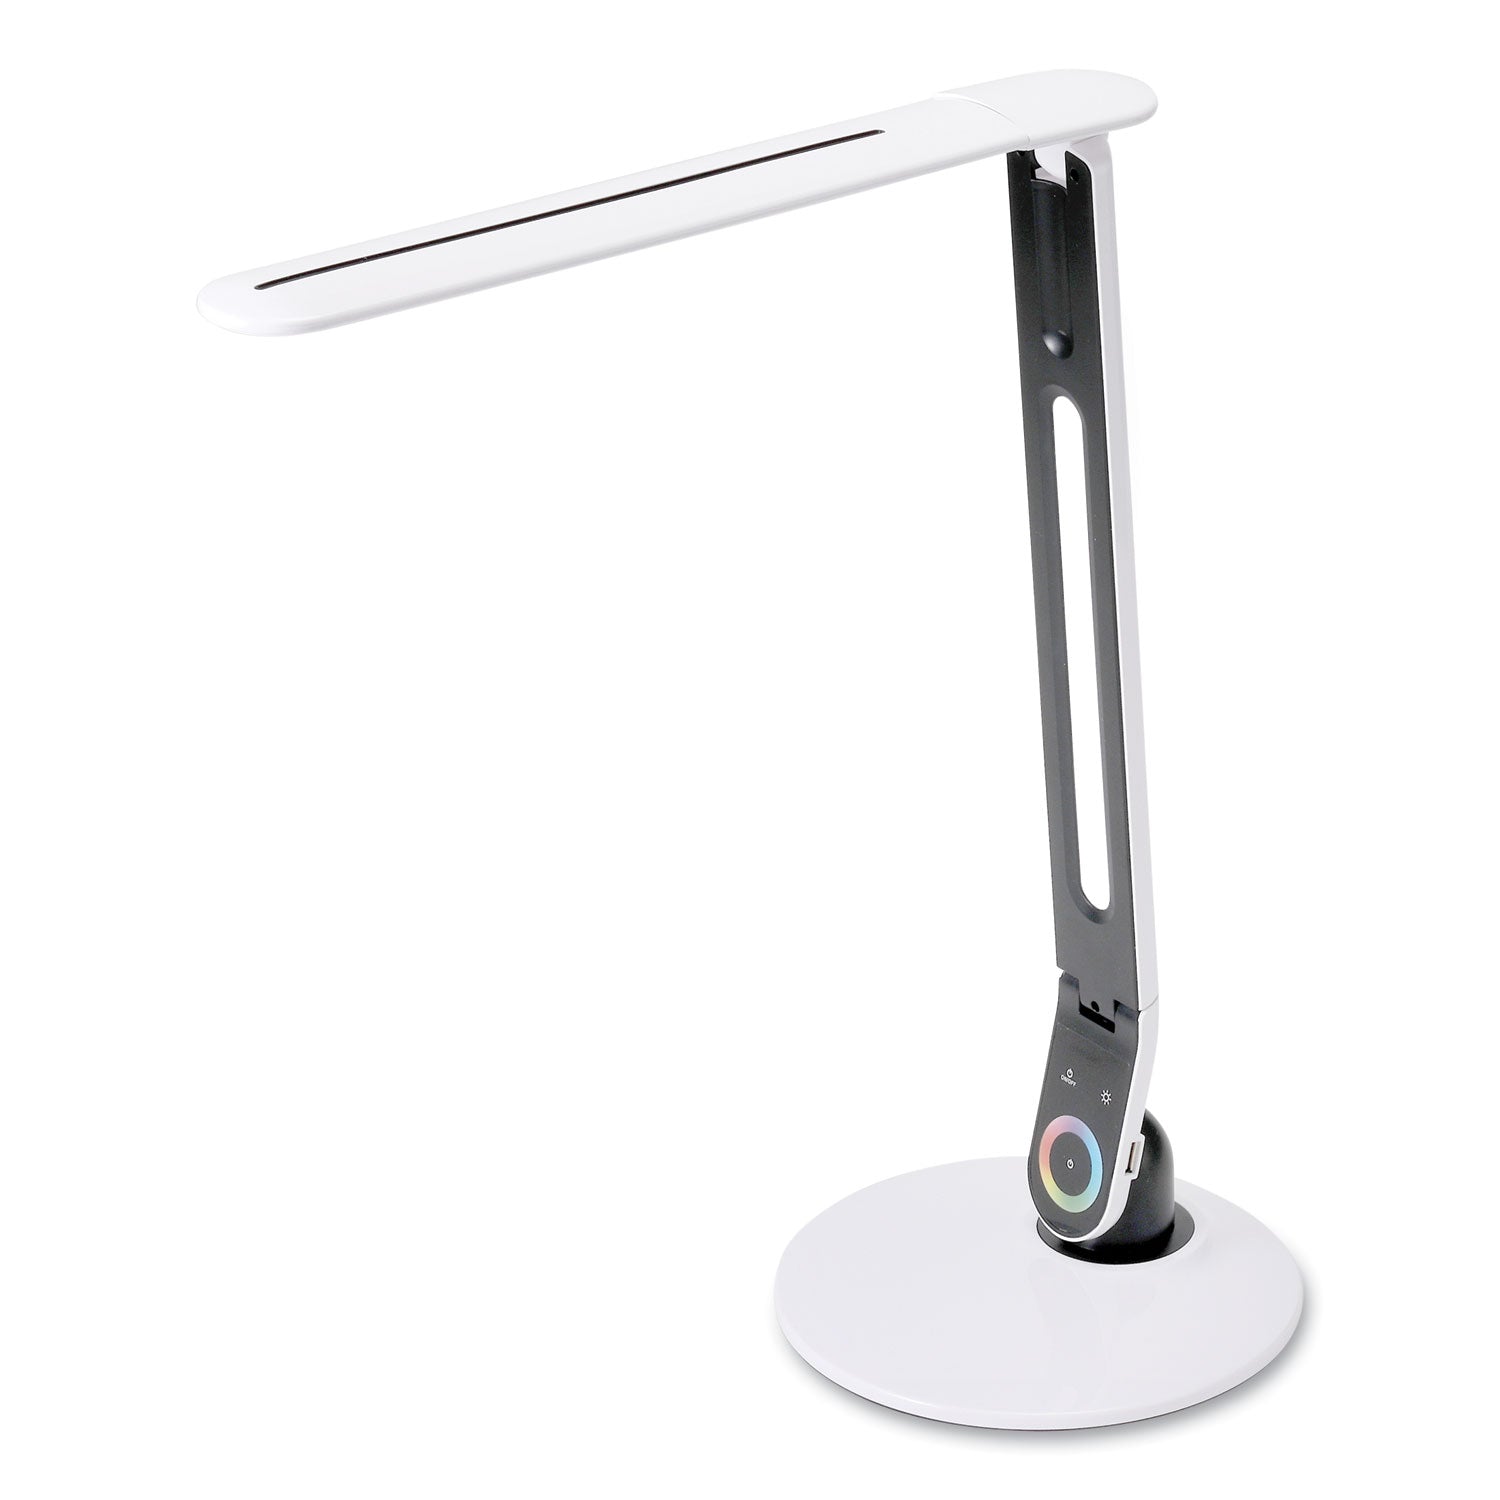 color-changing-led-desk-lamp-with-rgb-arm-1812-high-white_bosvled1605bos - 1